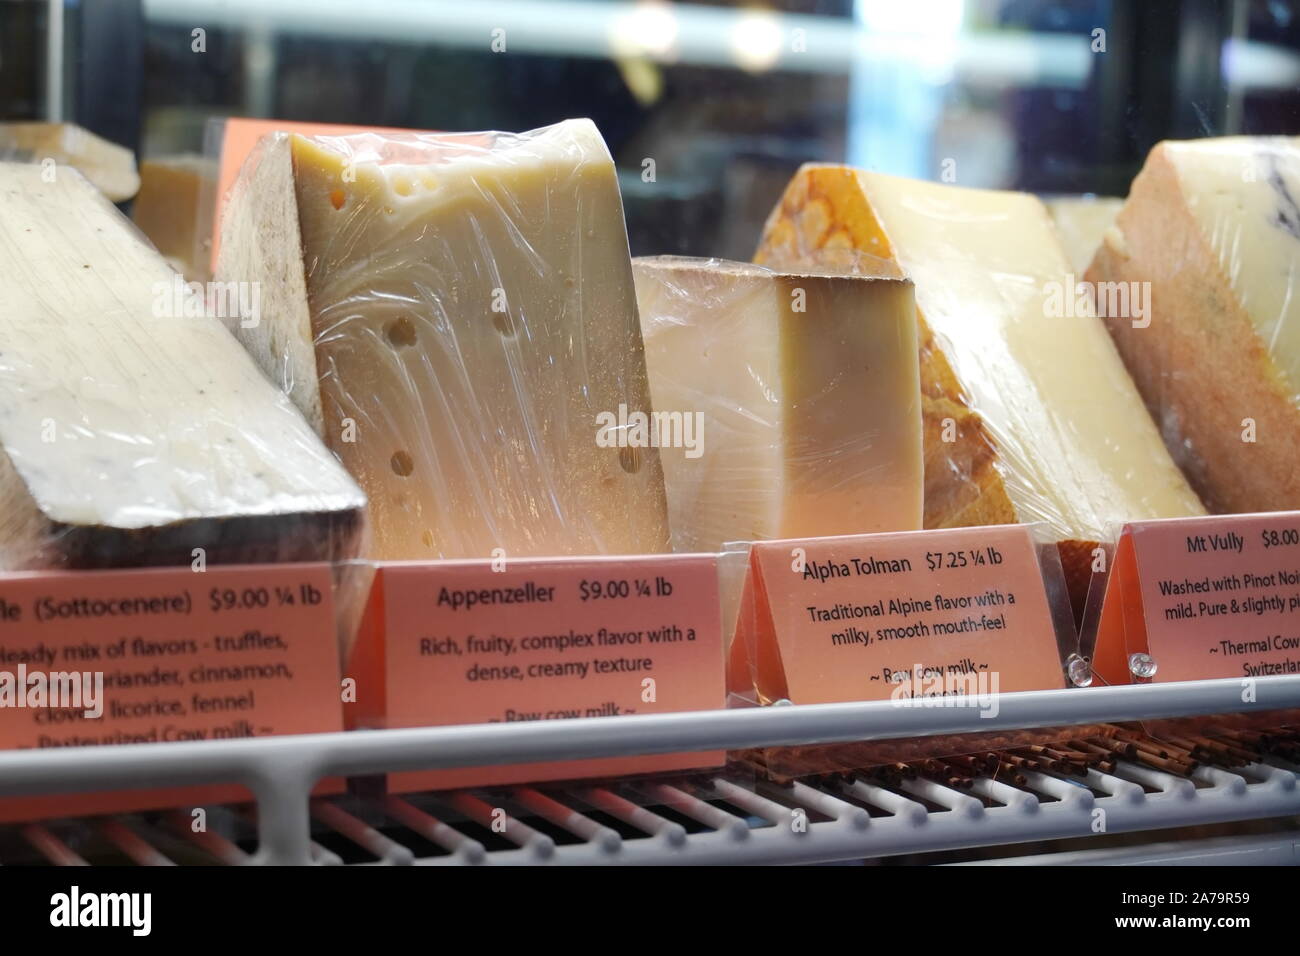 Boothbay Harbor, ME / USA - October 20, 2019: Various gourmet cheeses behind a glass display at Eventide Specialties Stock Photo